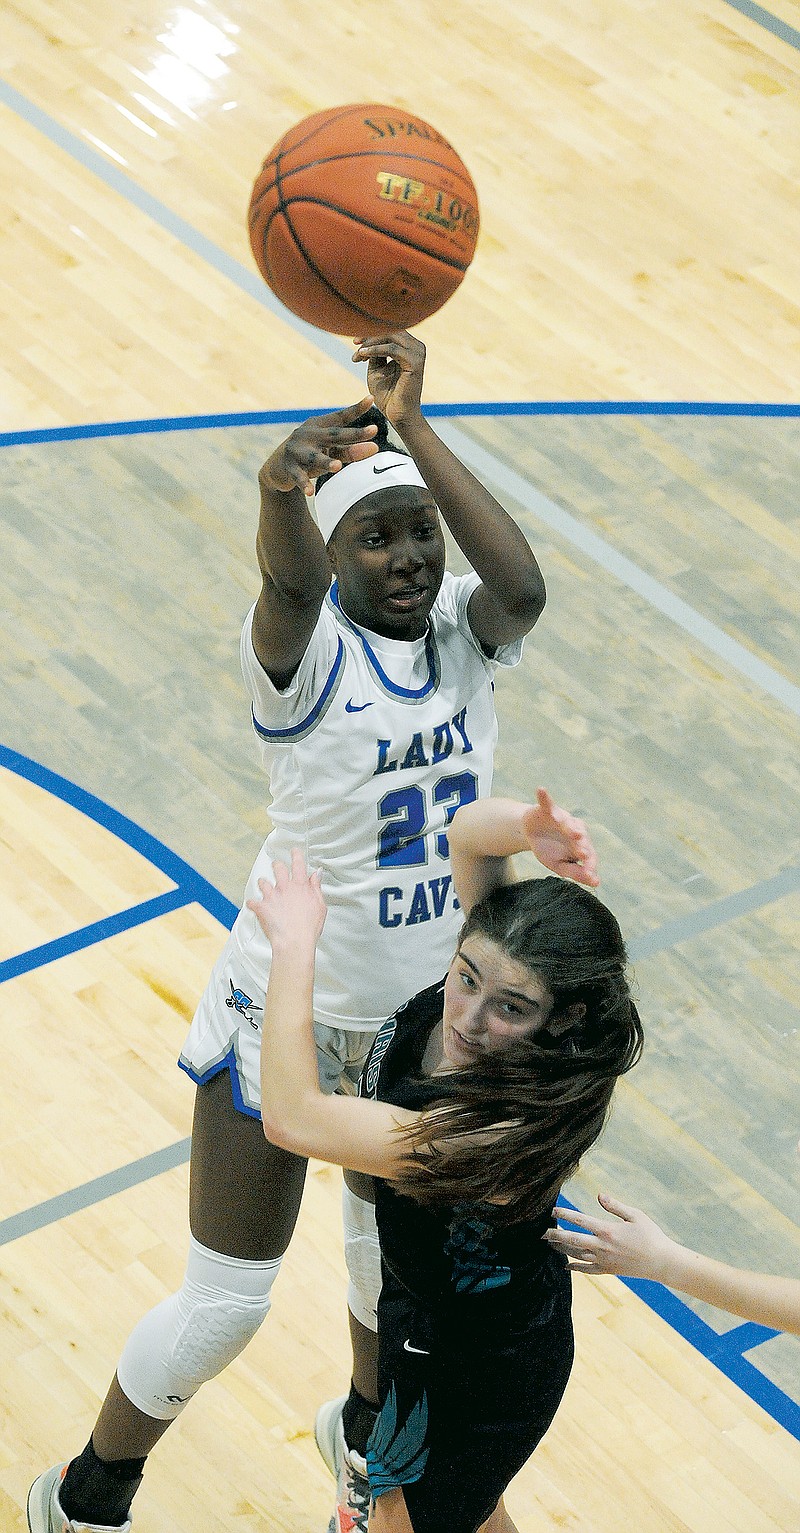 Capital City's Jada Anderson shoots over the top of O'Fallon Christian's Nicole Schwepker during a game earlier this month at Capital City High School. (Shaun Zimmerman/News Tribune)